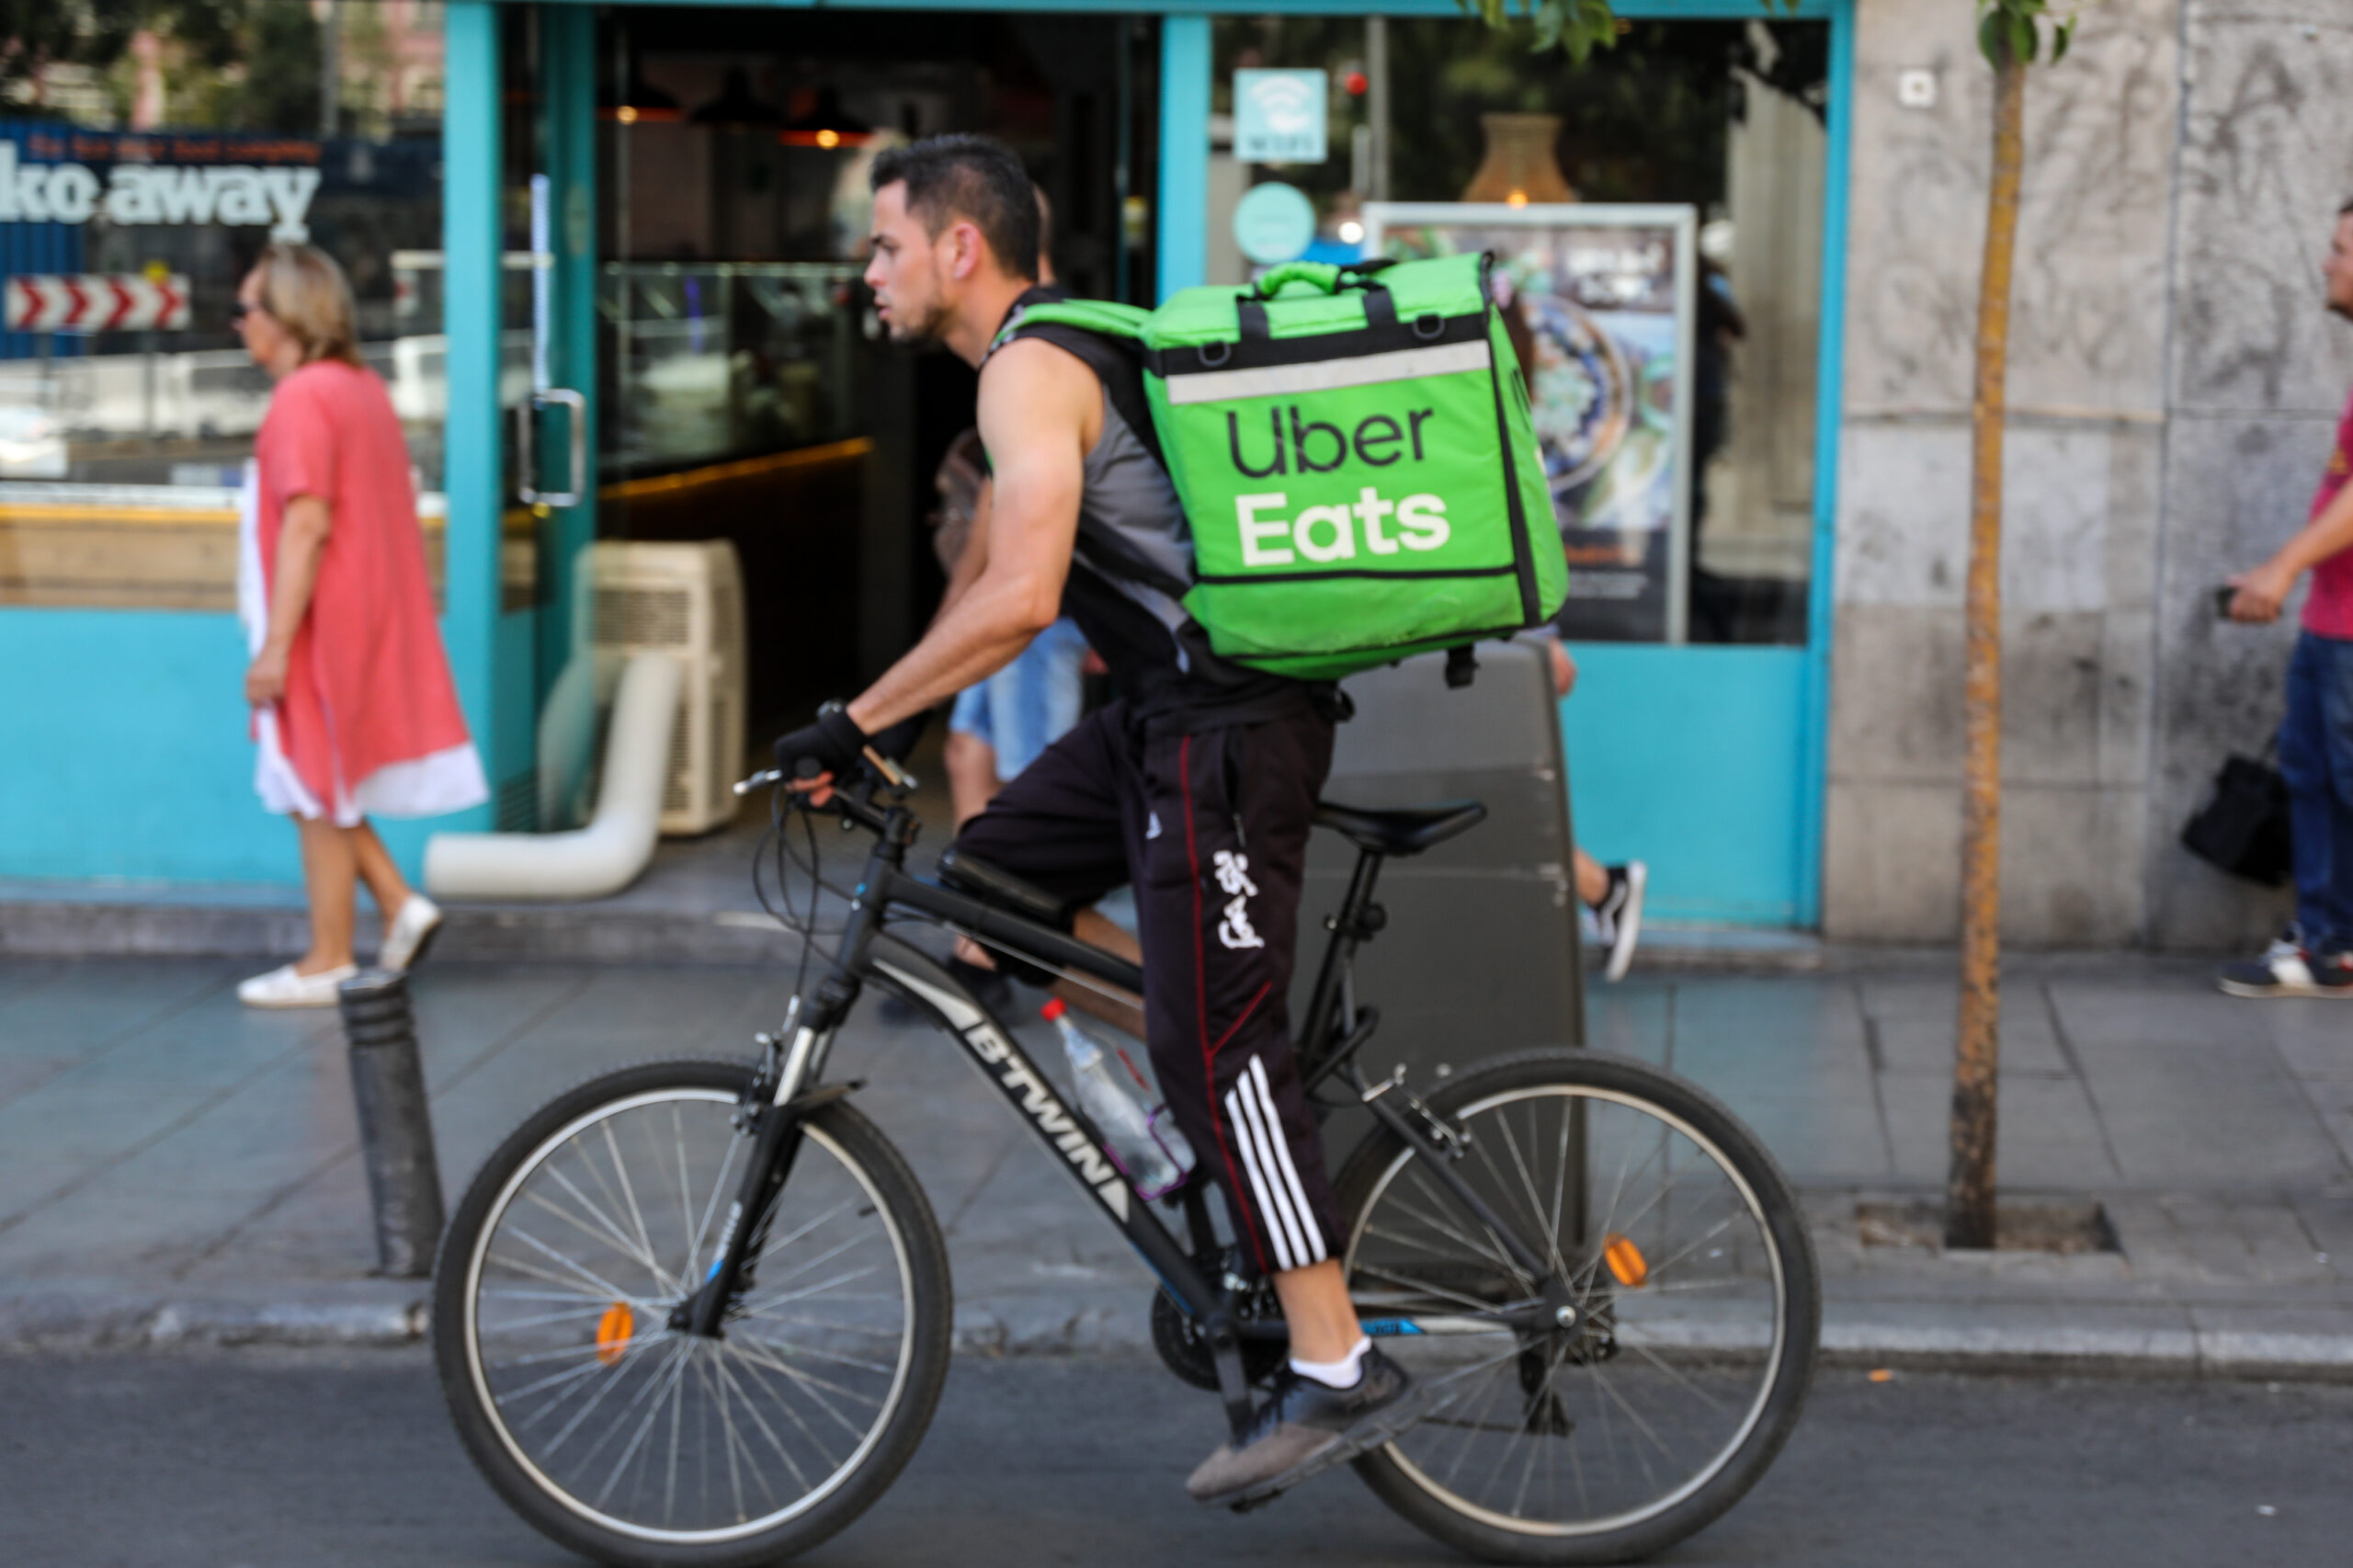 Economy.  Uber Eats is launching a new chat management function to enhance the security of its carriers